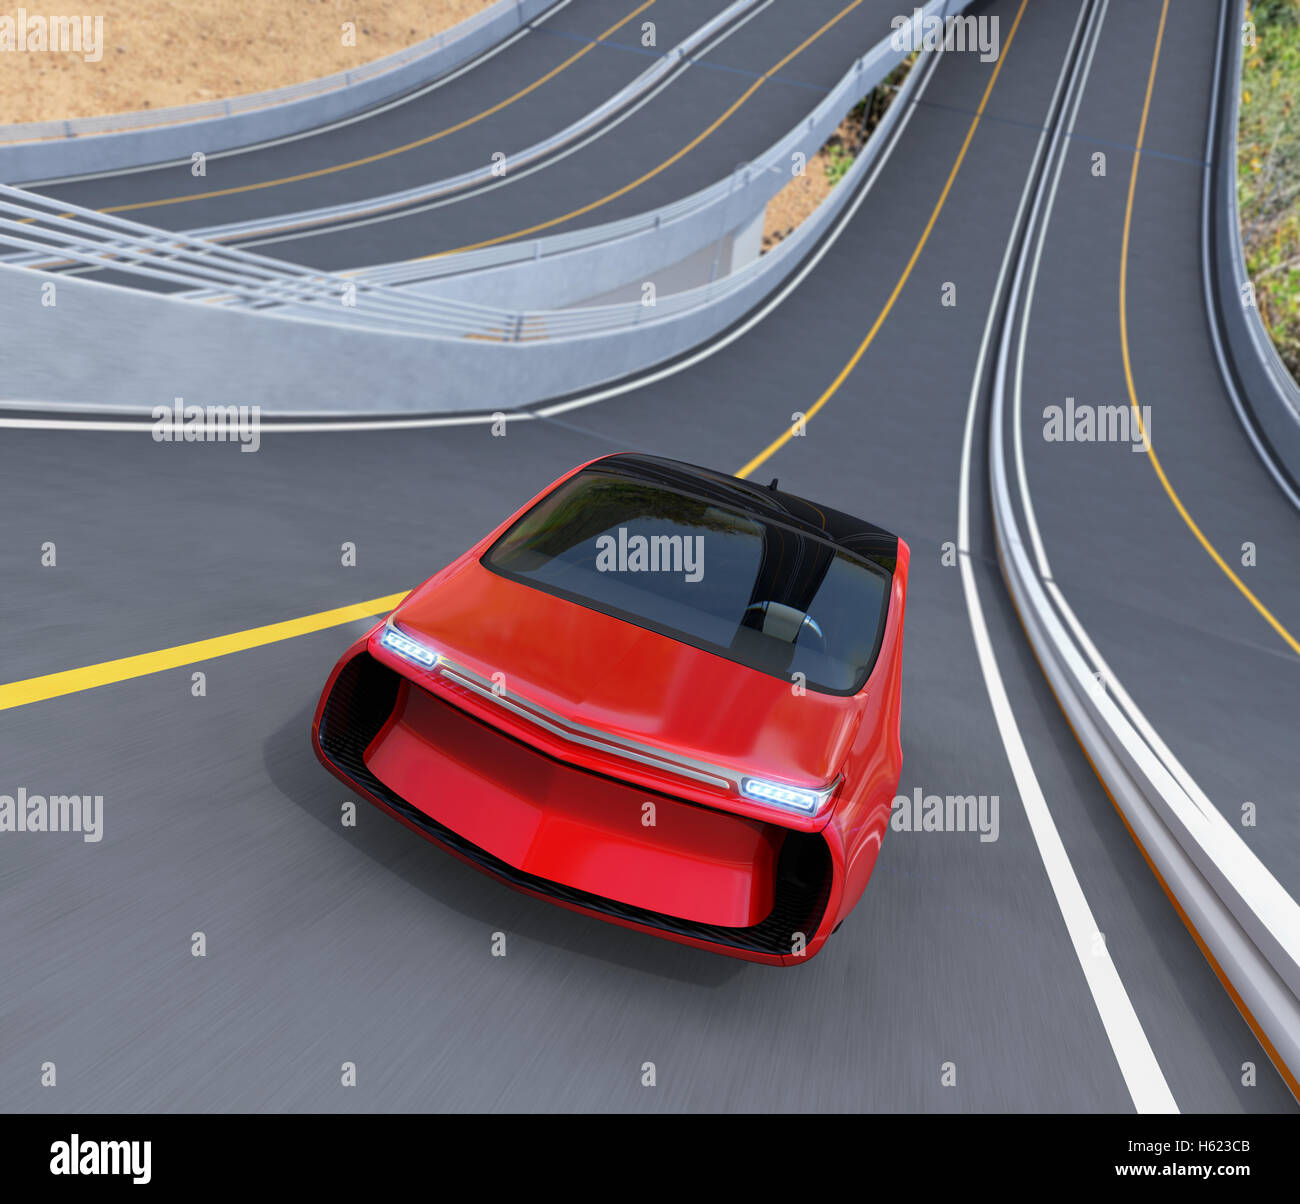 Front view of red electric car driving on loop bridge. 3D rendering image. Stock Photo